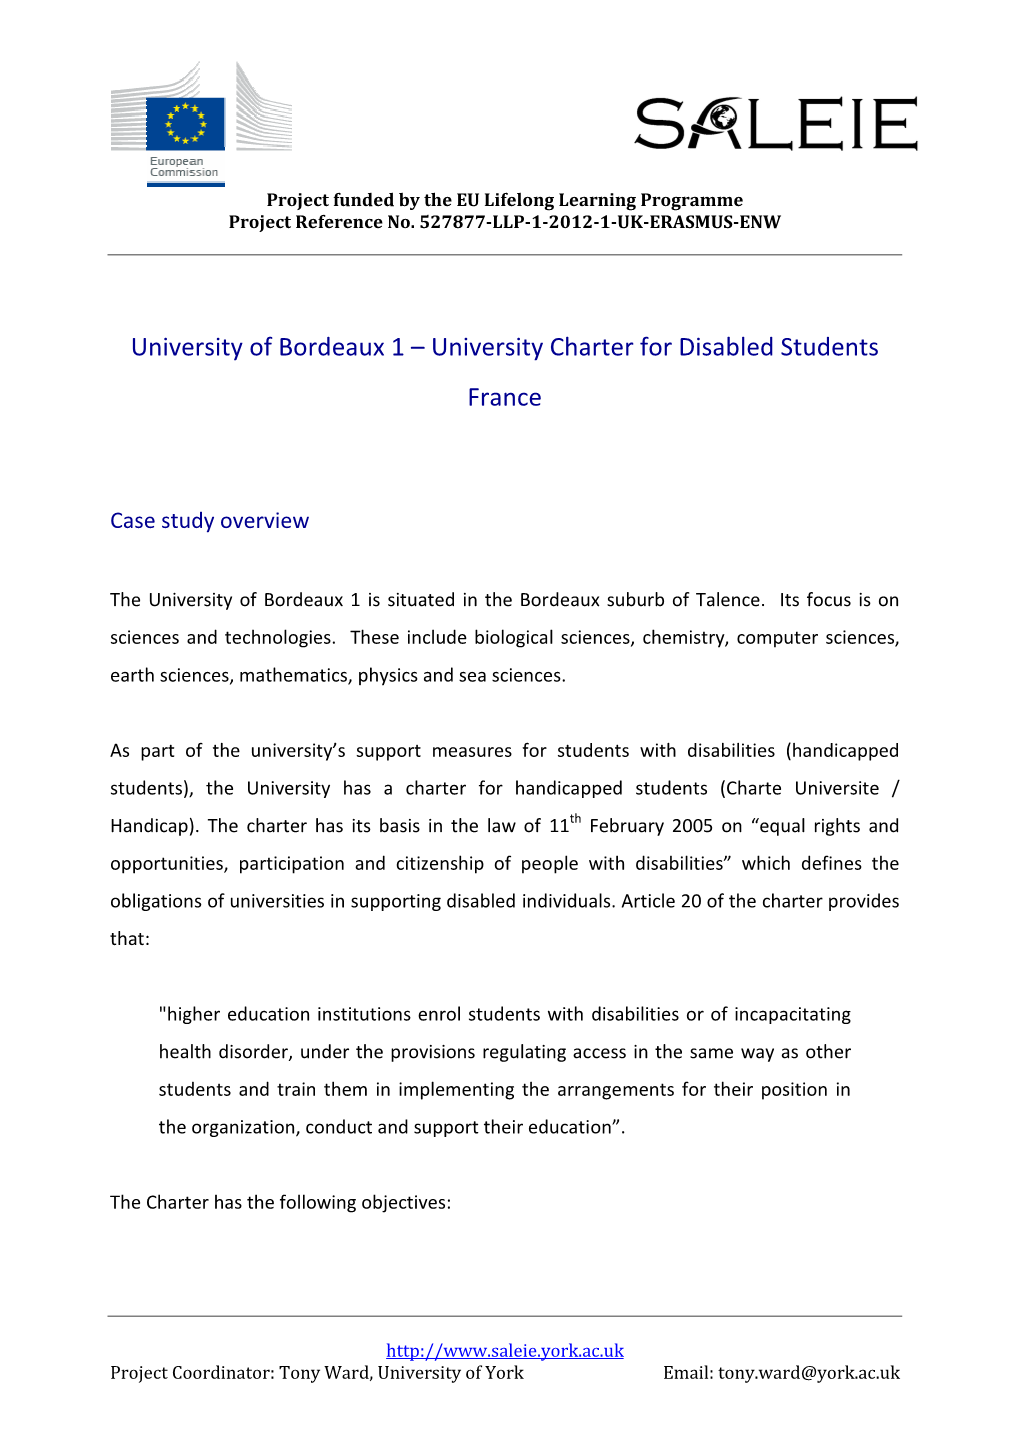 University Charter for Disabled Students France